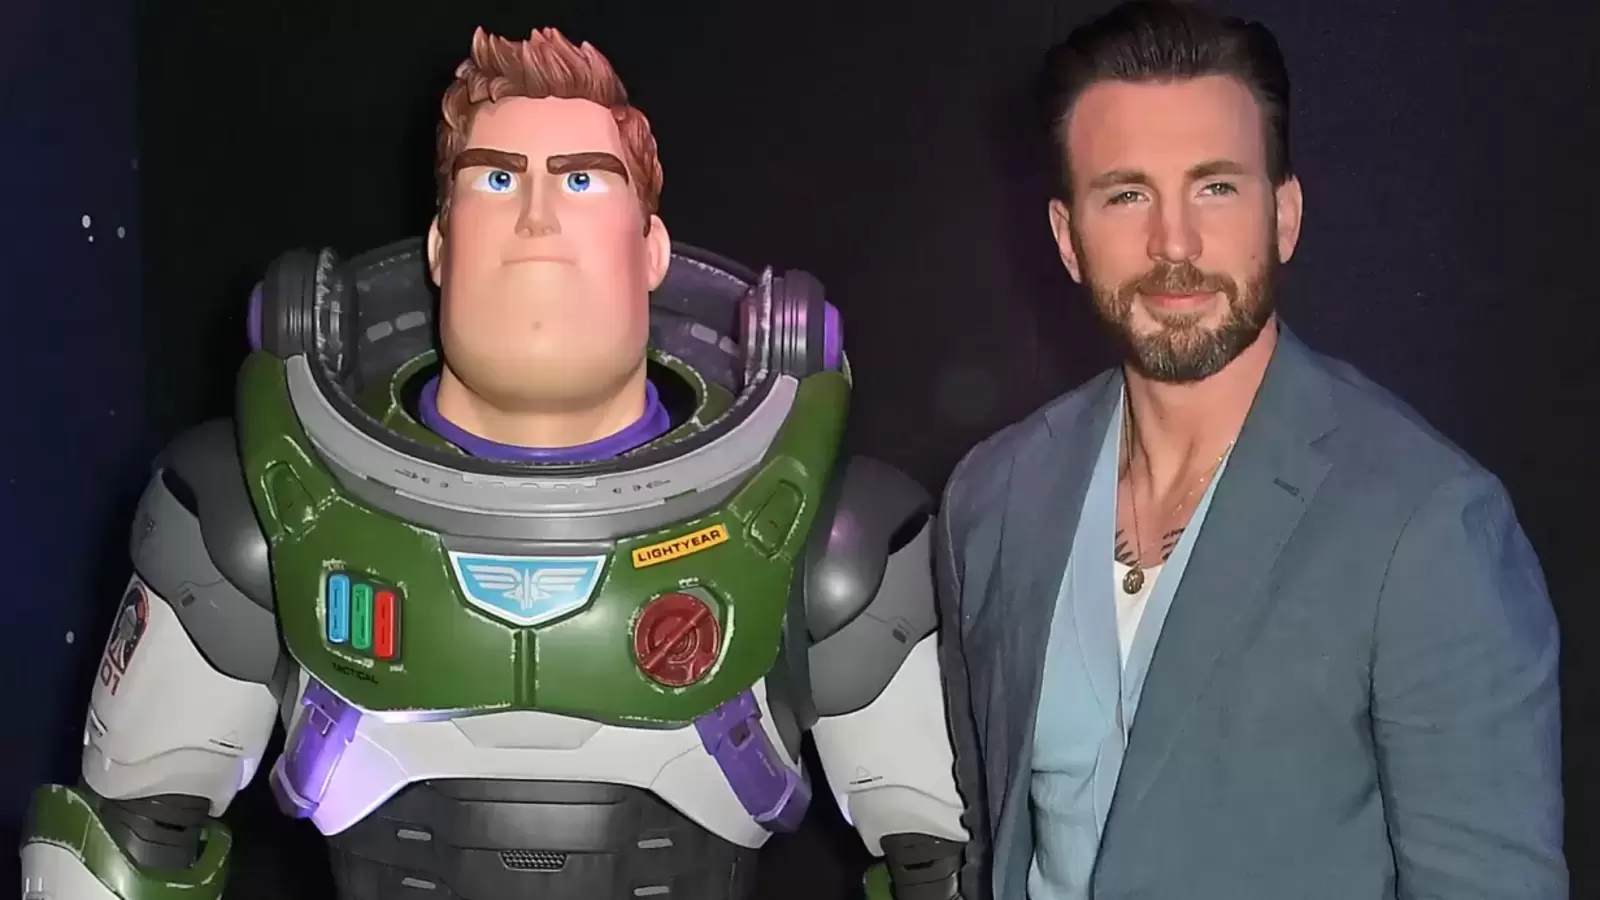 Chris Evans says people being offended by Lightyear’s same-sex kiss are ‘idiots’: ‘They die off like dinosaurs’